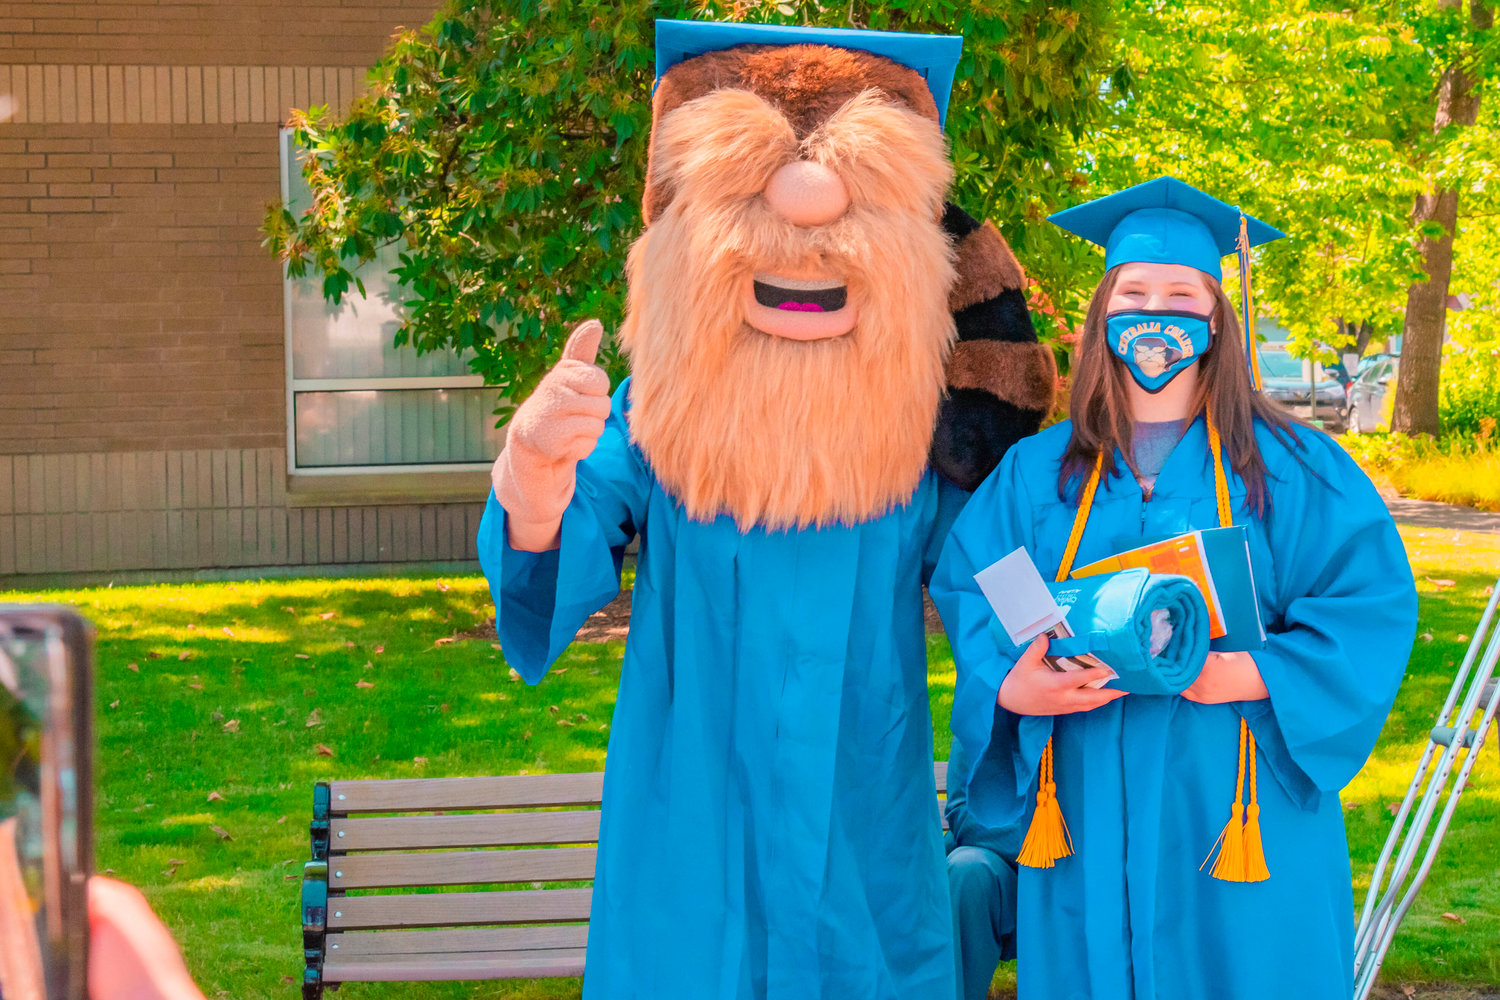 Hannah Ireton poses for a photo with the Trailblazers mascot after receiving her diploma during the Centralia College graduation ceremony on Friday.